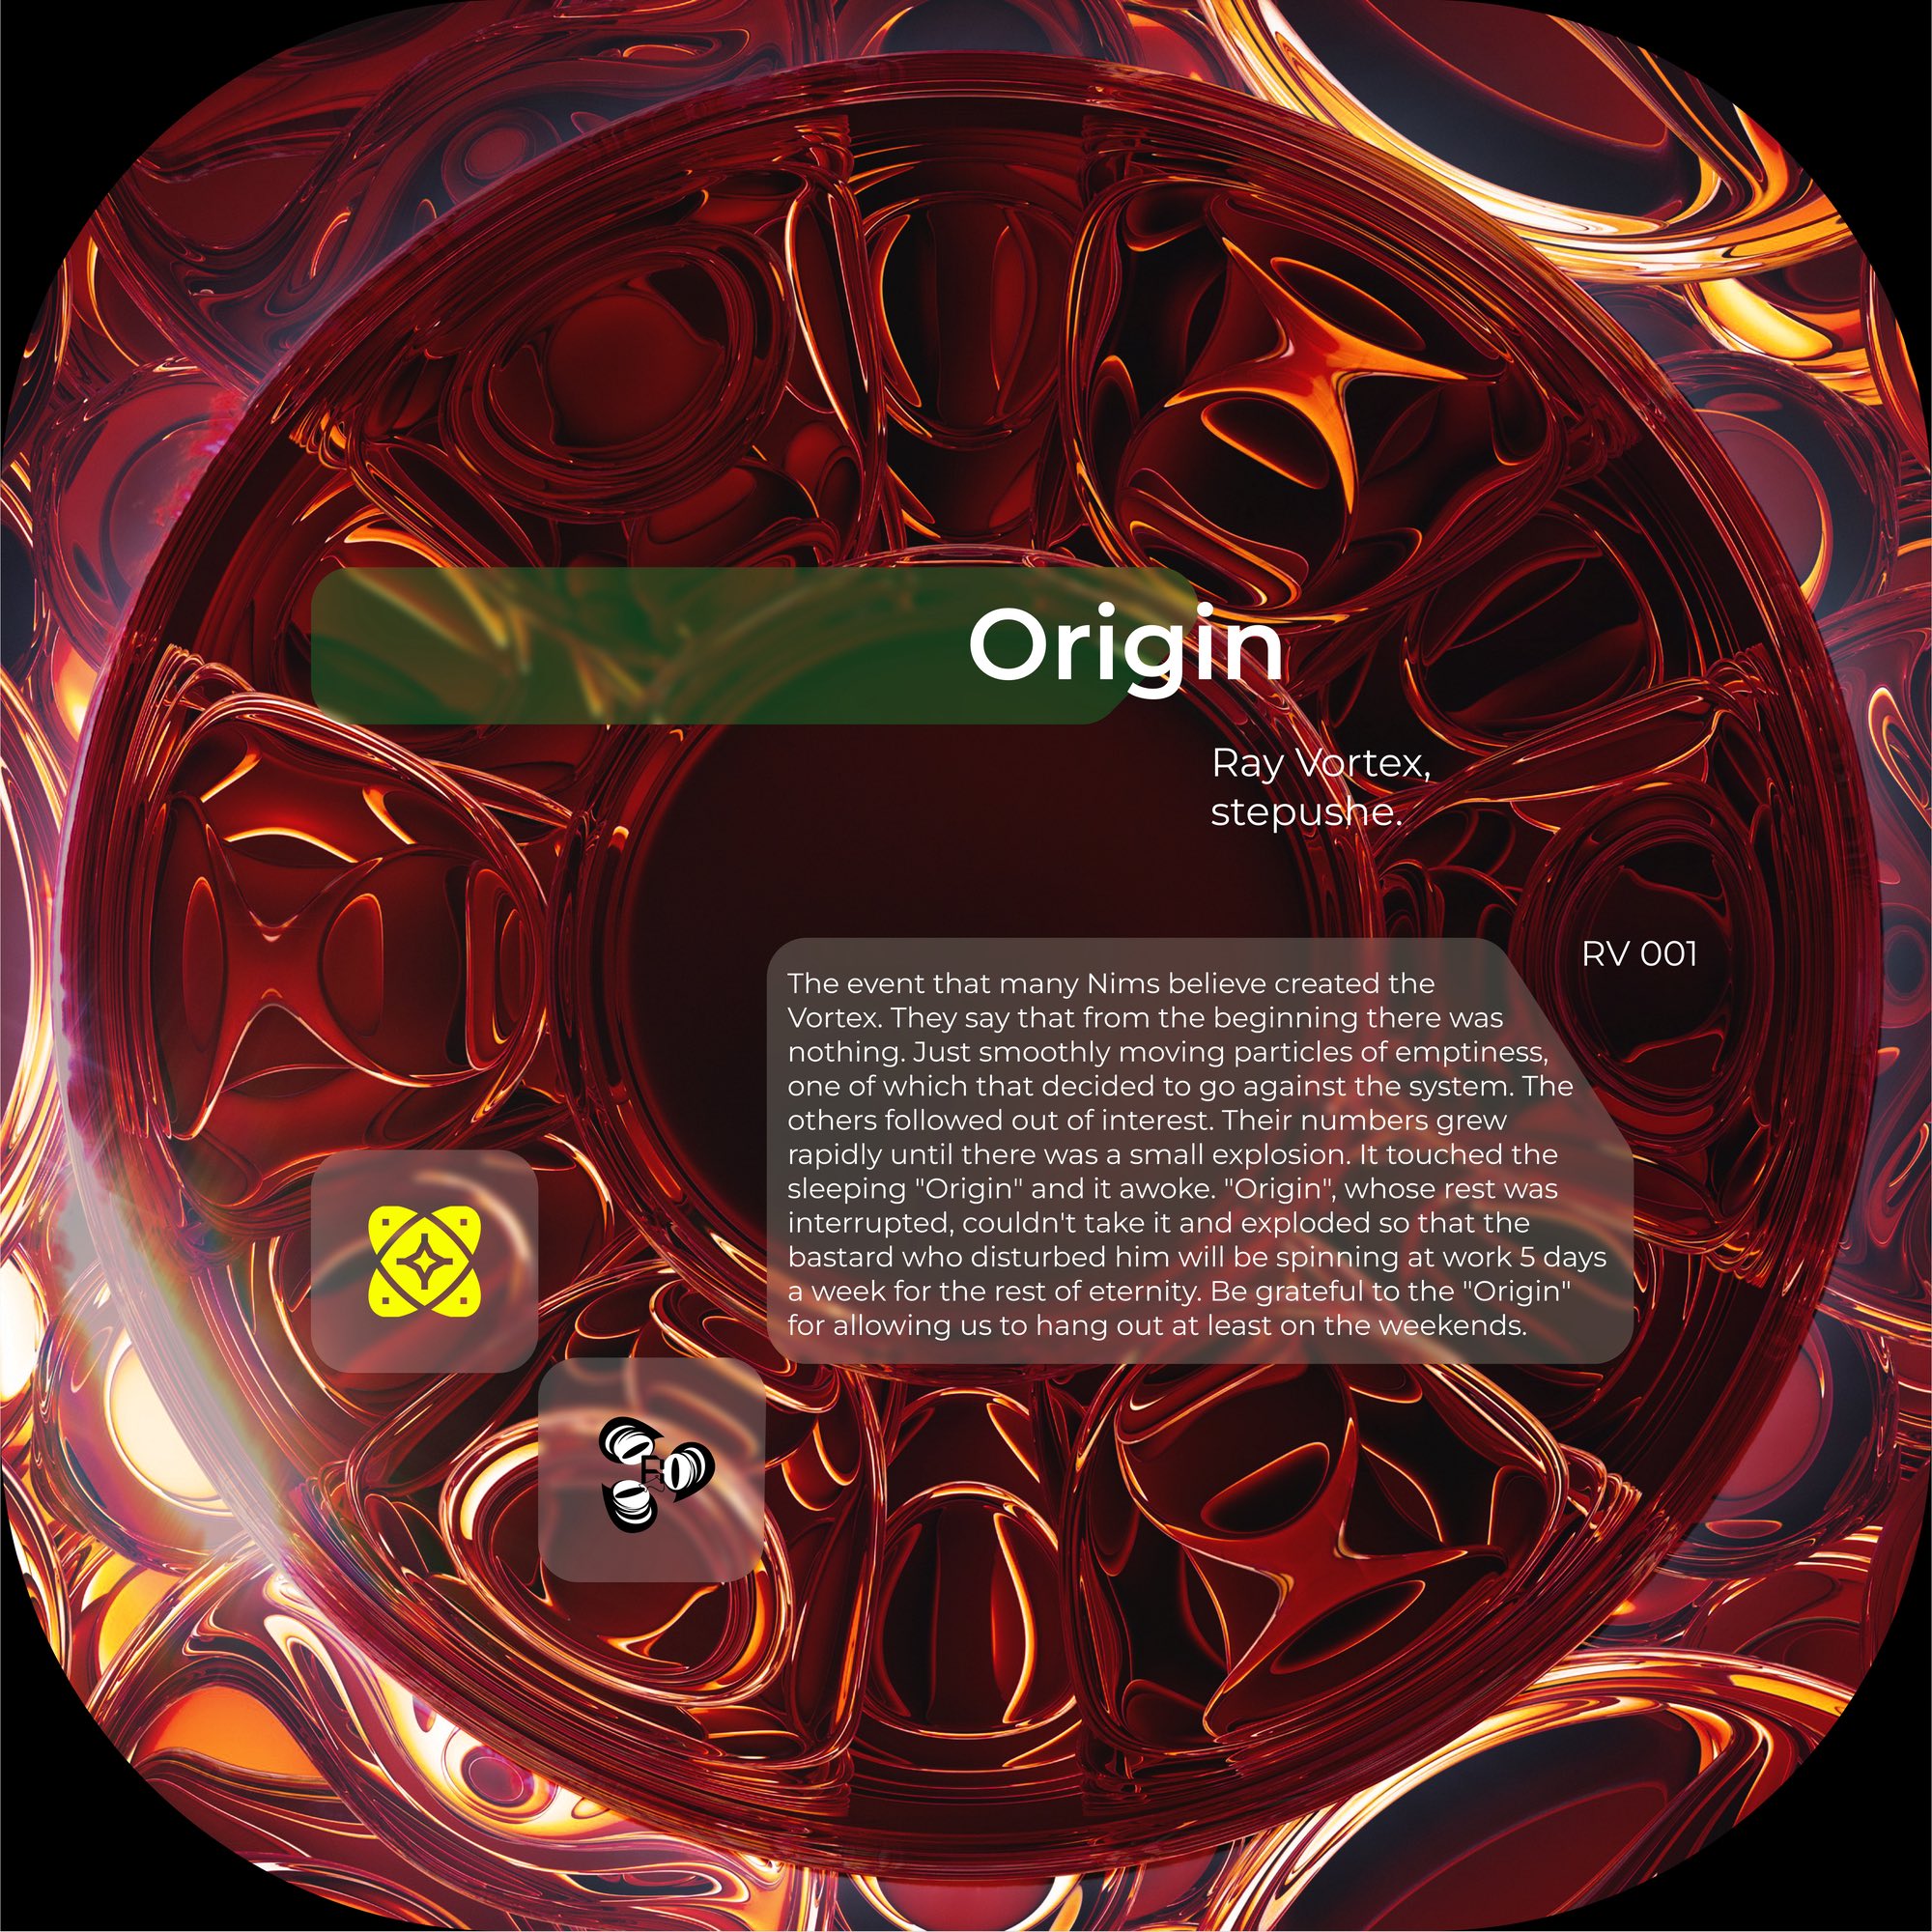 Ray Vortex Makes His Talents Known with His Latest Release 'Origin'